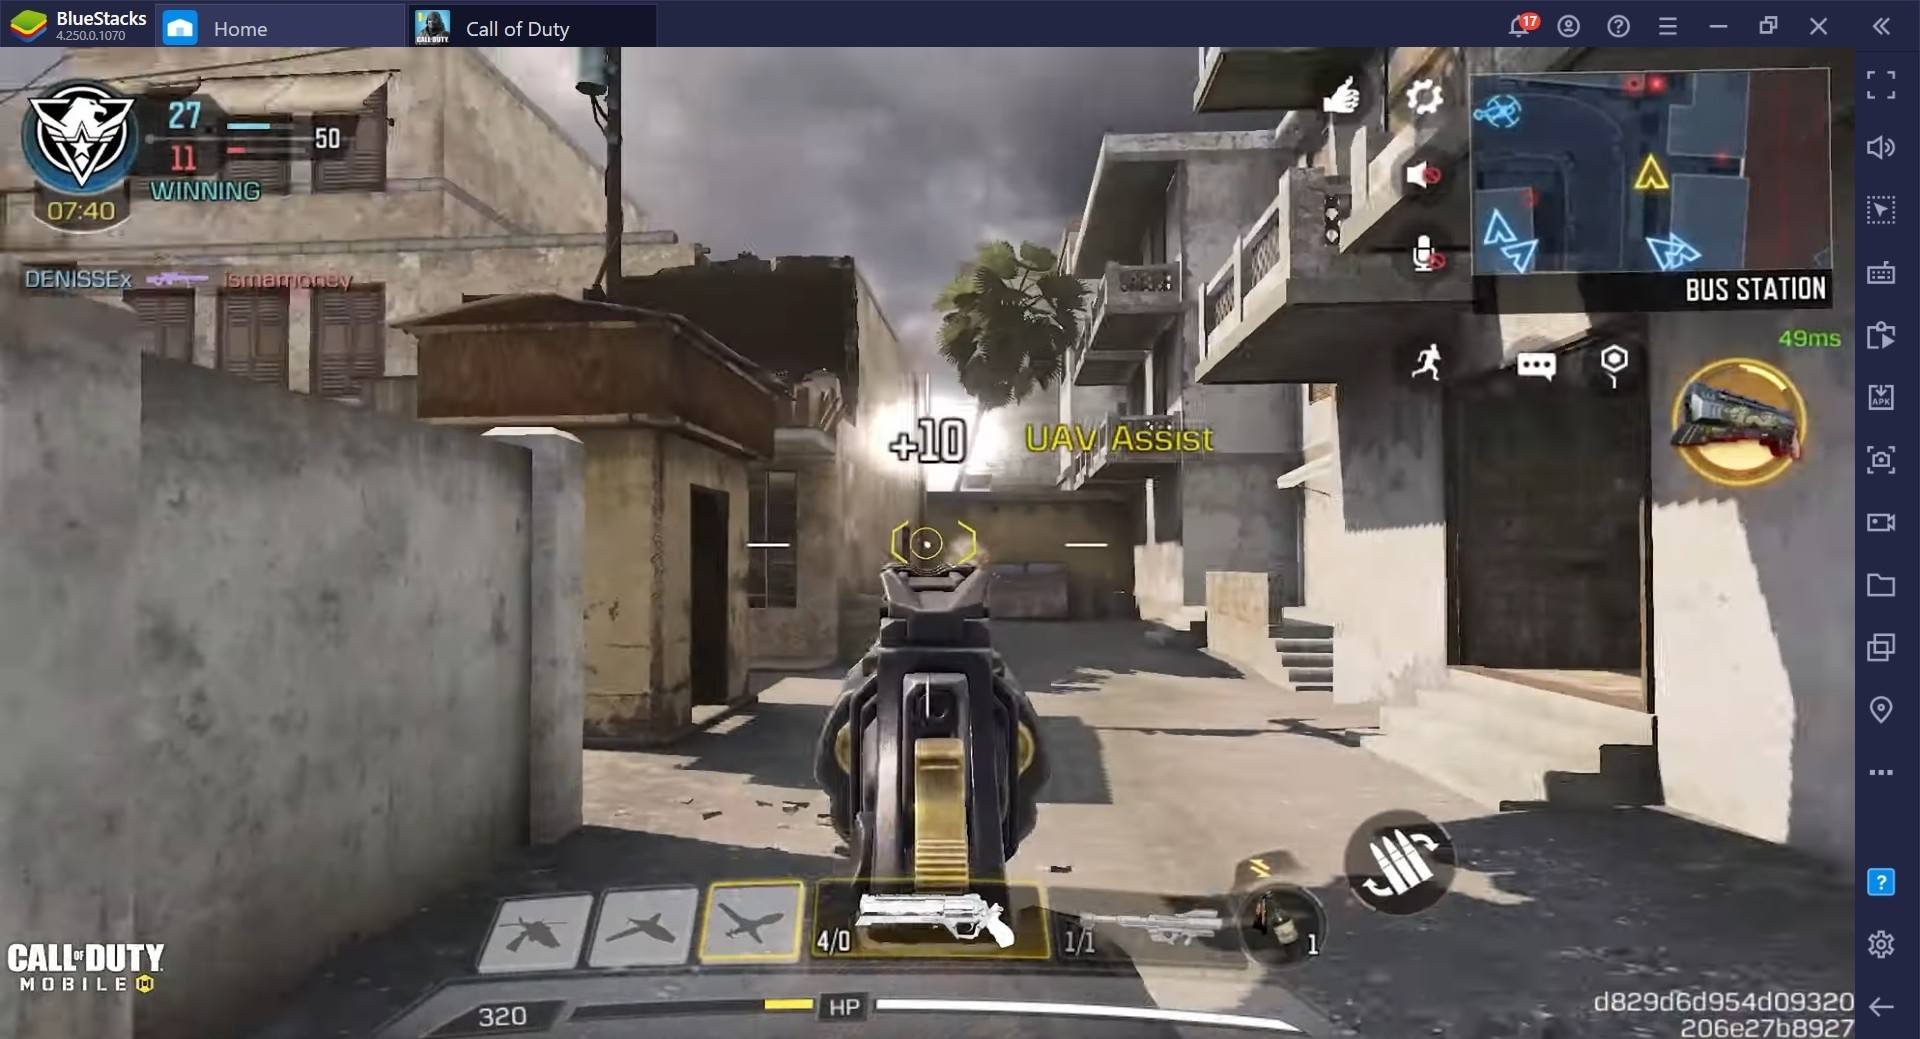 Carrying Solo in Call of Duty Mobile Multiplayer Matches, It's Way